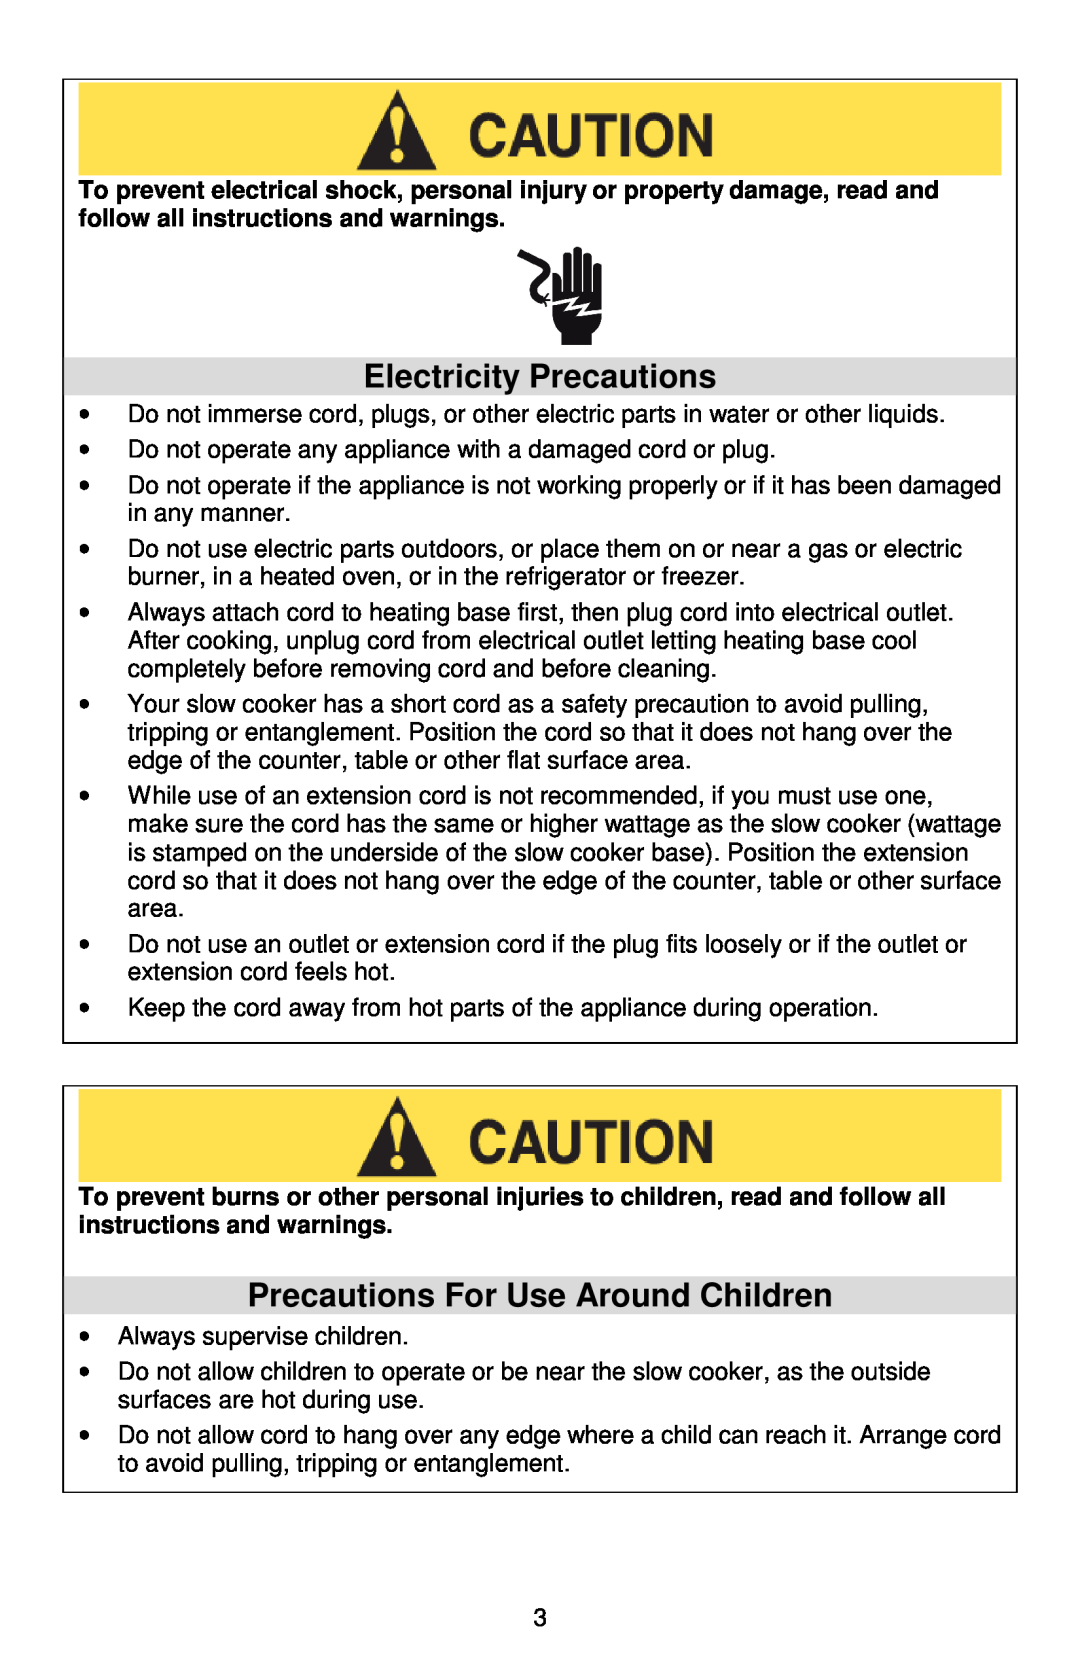 West Bend Cookers instruction manual Electricity Precautions, Precautions For Use Around Children 